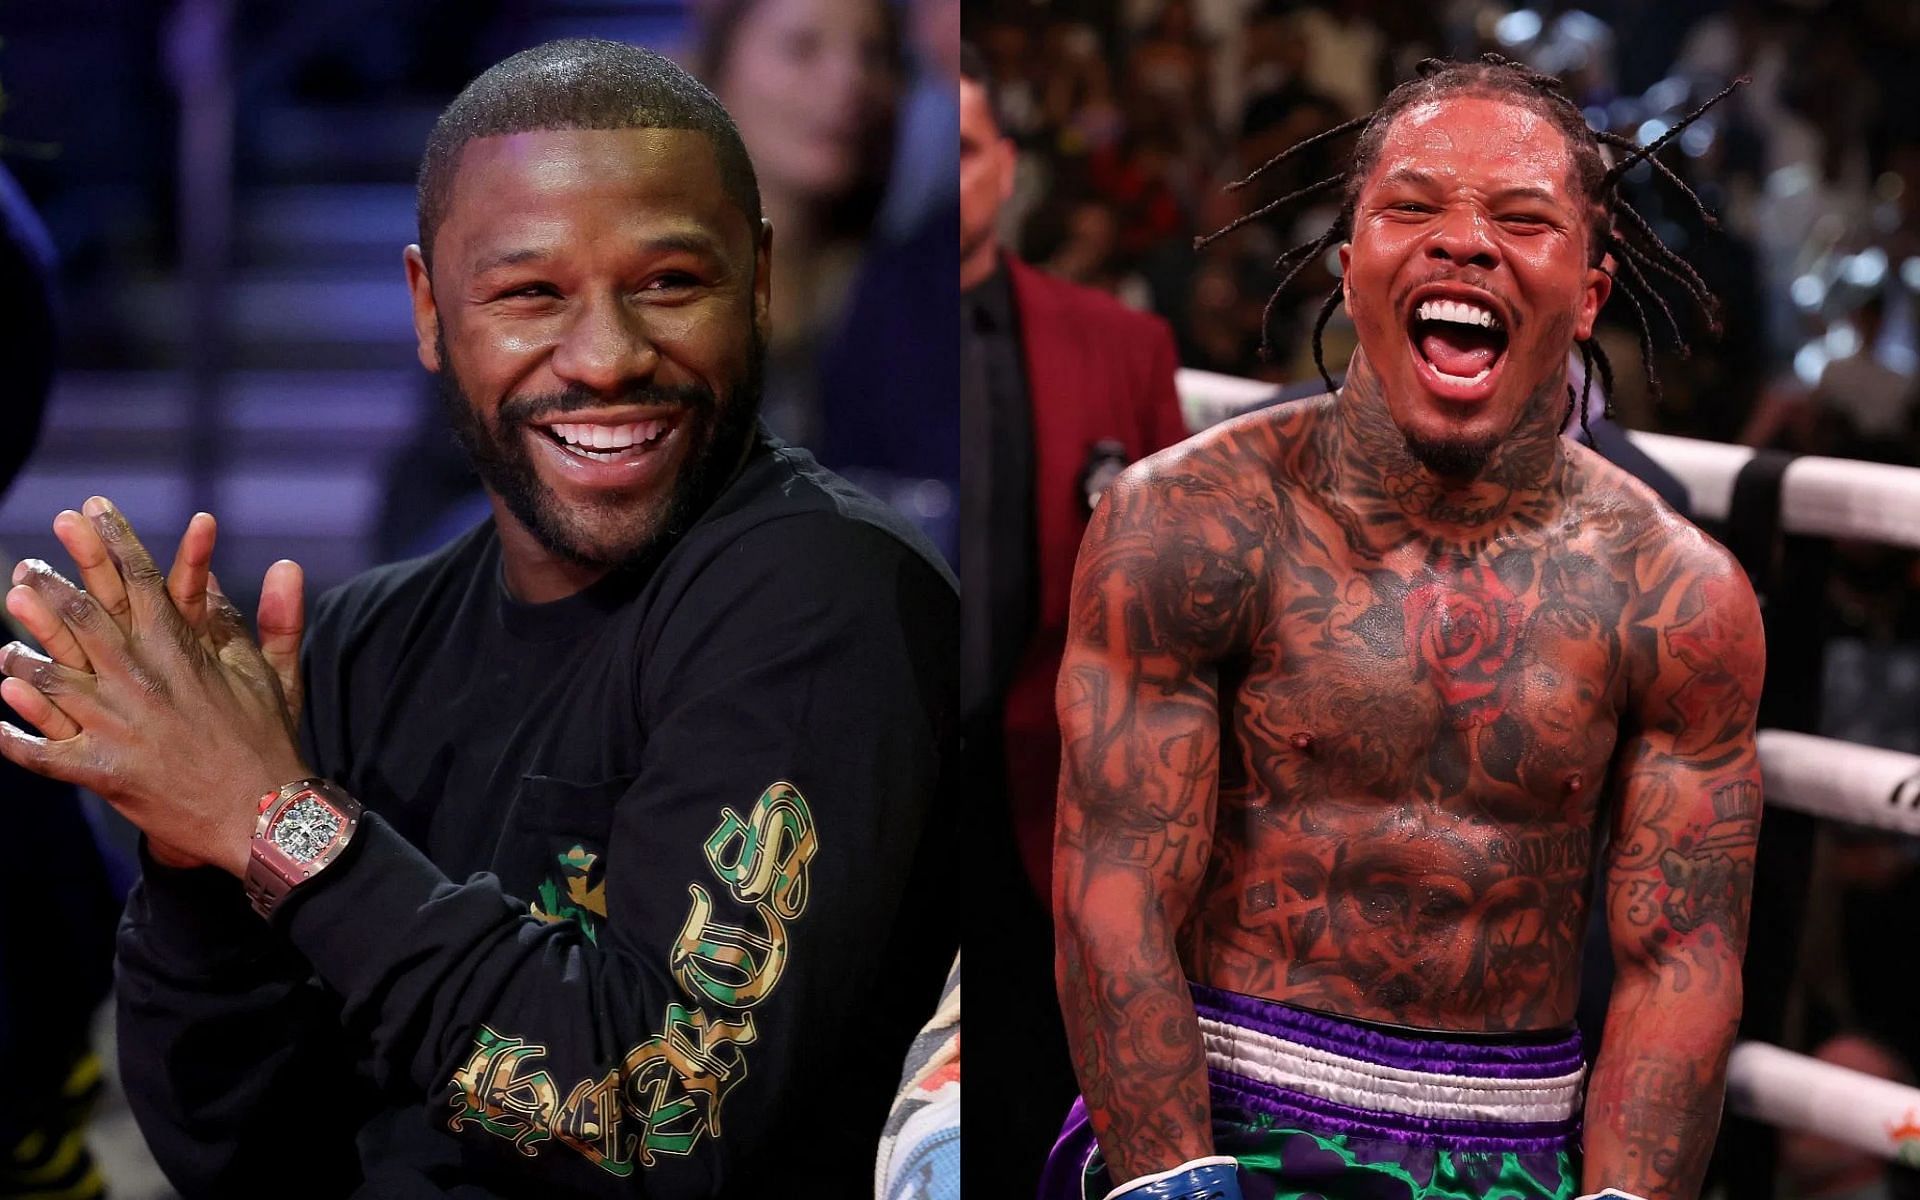 Floyd Mayweather (left) targeted by Gervonta Davis (right) in recent online back-and-forth [Images courtesy: Getty Images]